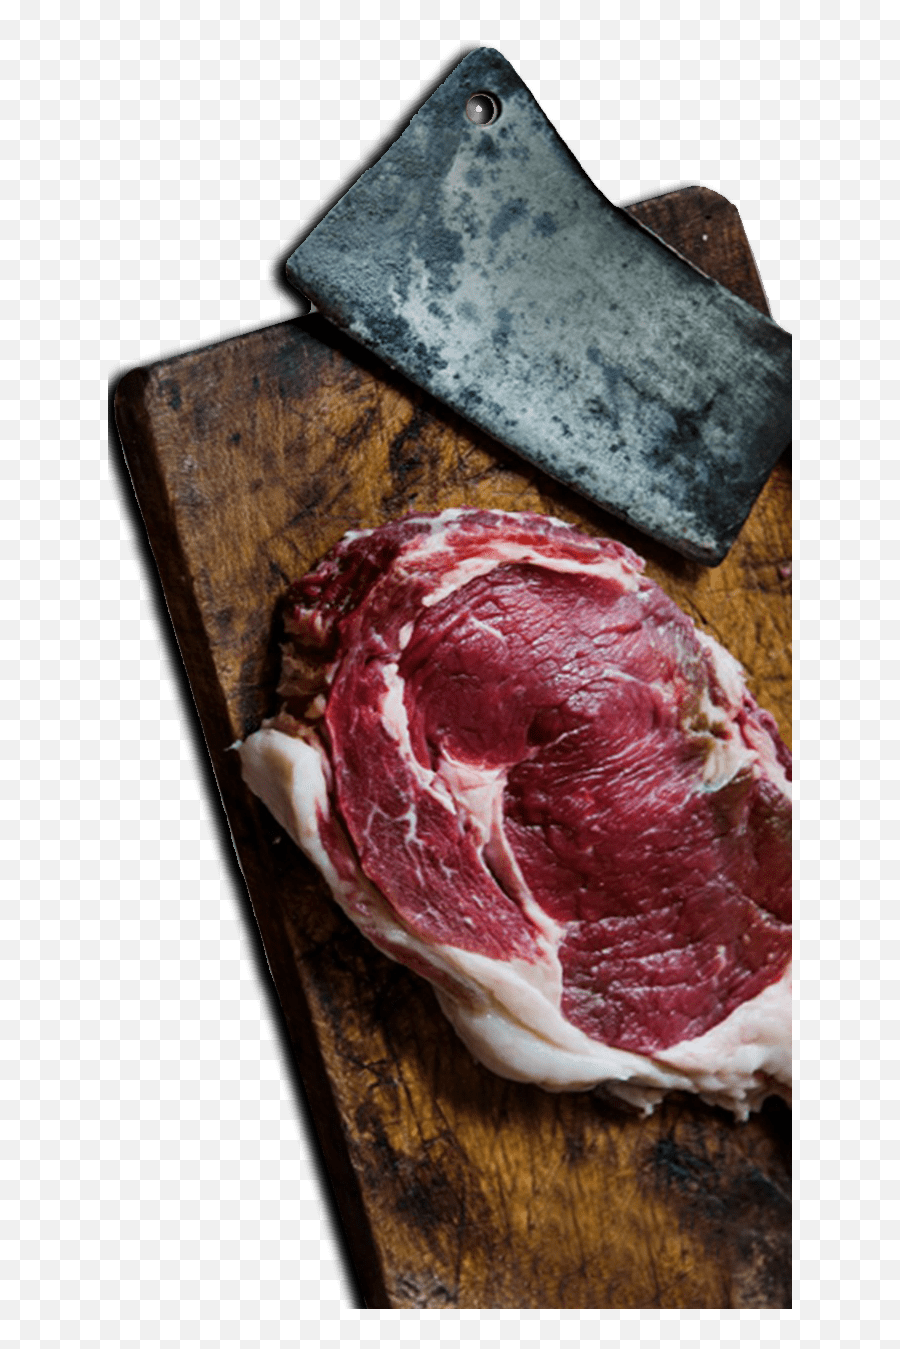 Quality Meats From The Best Butchers - Beck U0026 Bulow Emoji,Meat Transparent